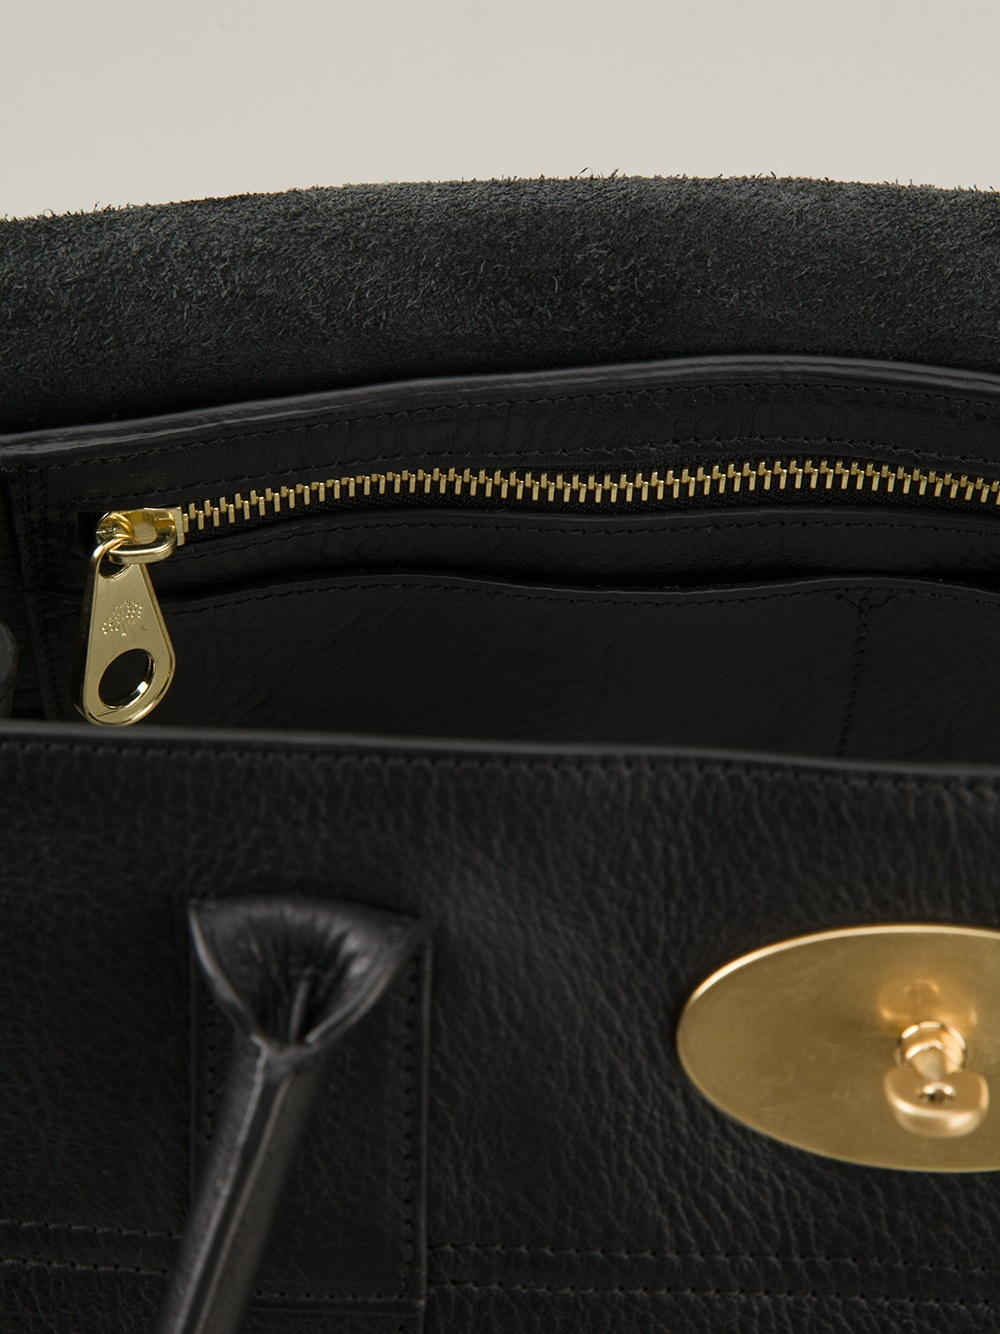 Lyst - Mulberry Bayswater Tote in Black